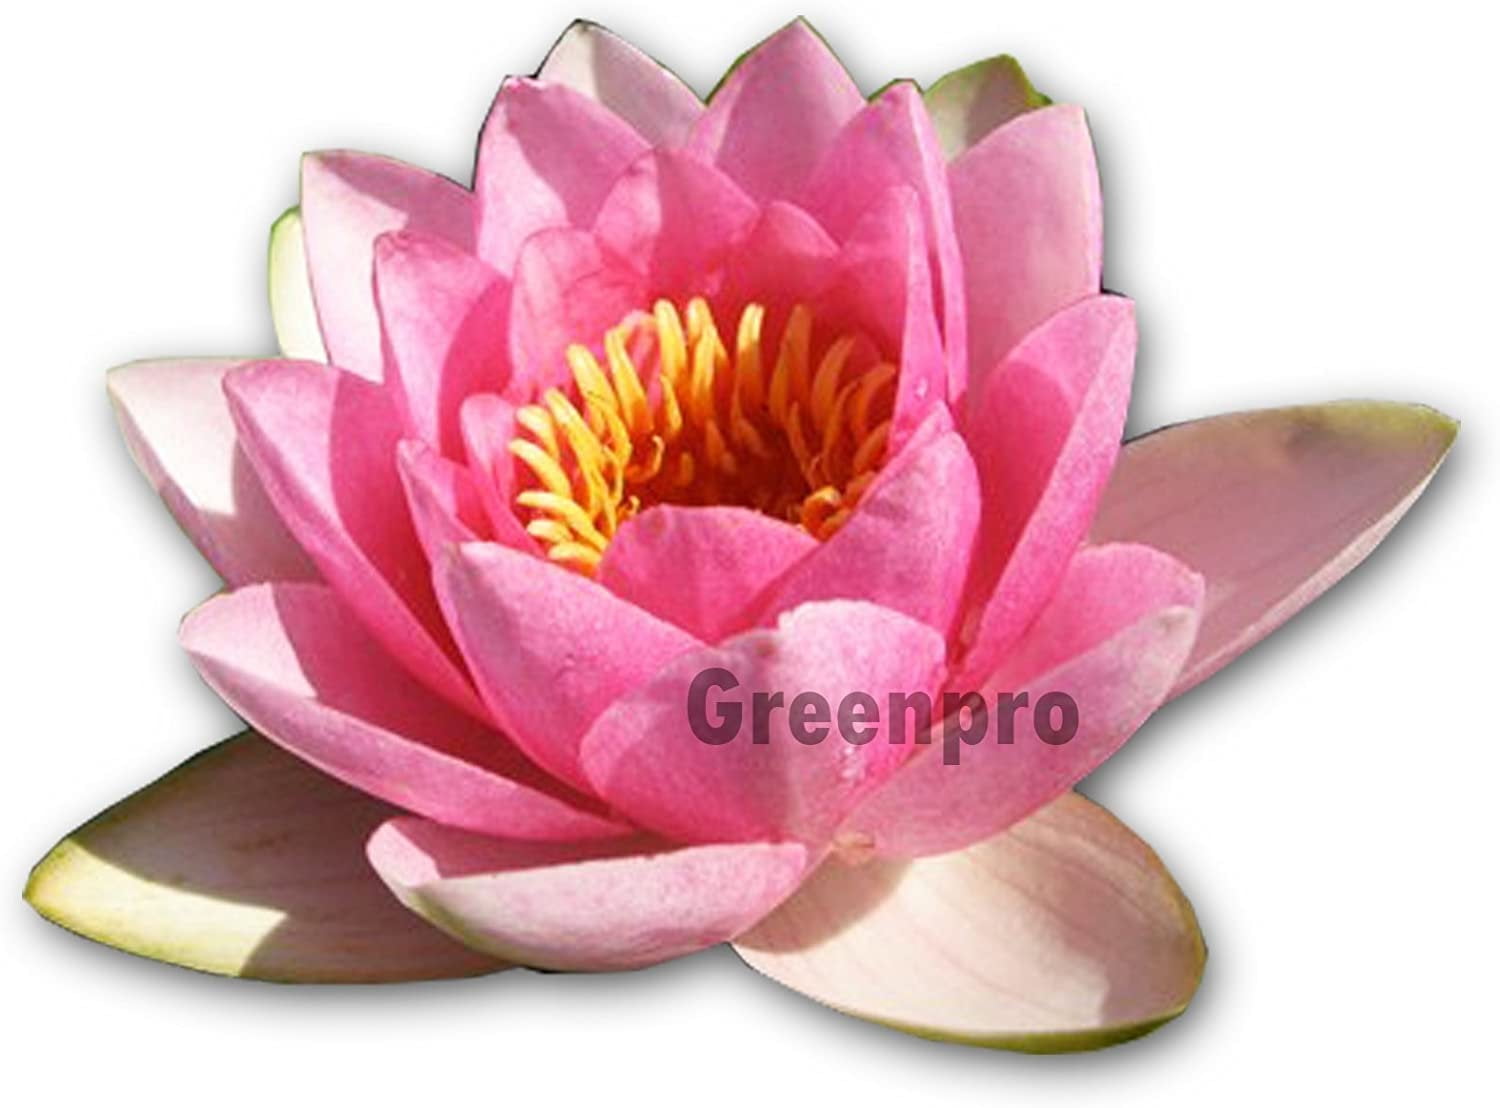 Live Aquatic Plant Nymphaea Masaniello Pink Hardy Water Lilies Tuber for Aquarium Freshwater Fish Pond by Greenpro